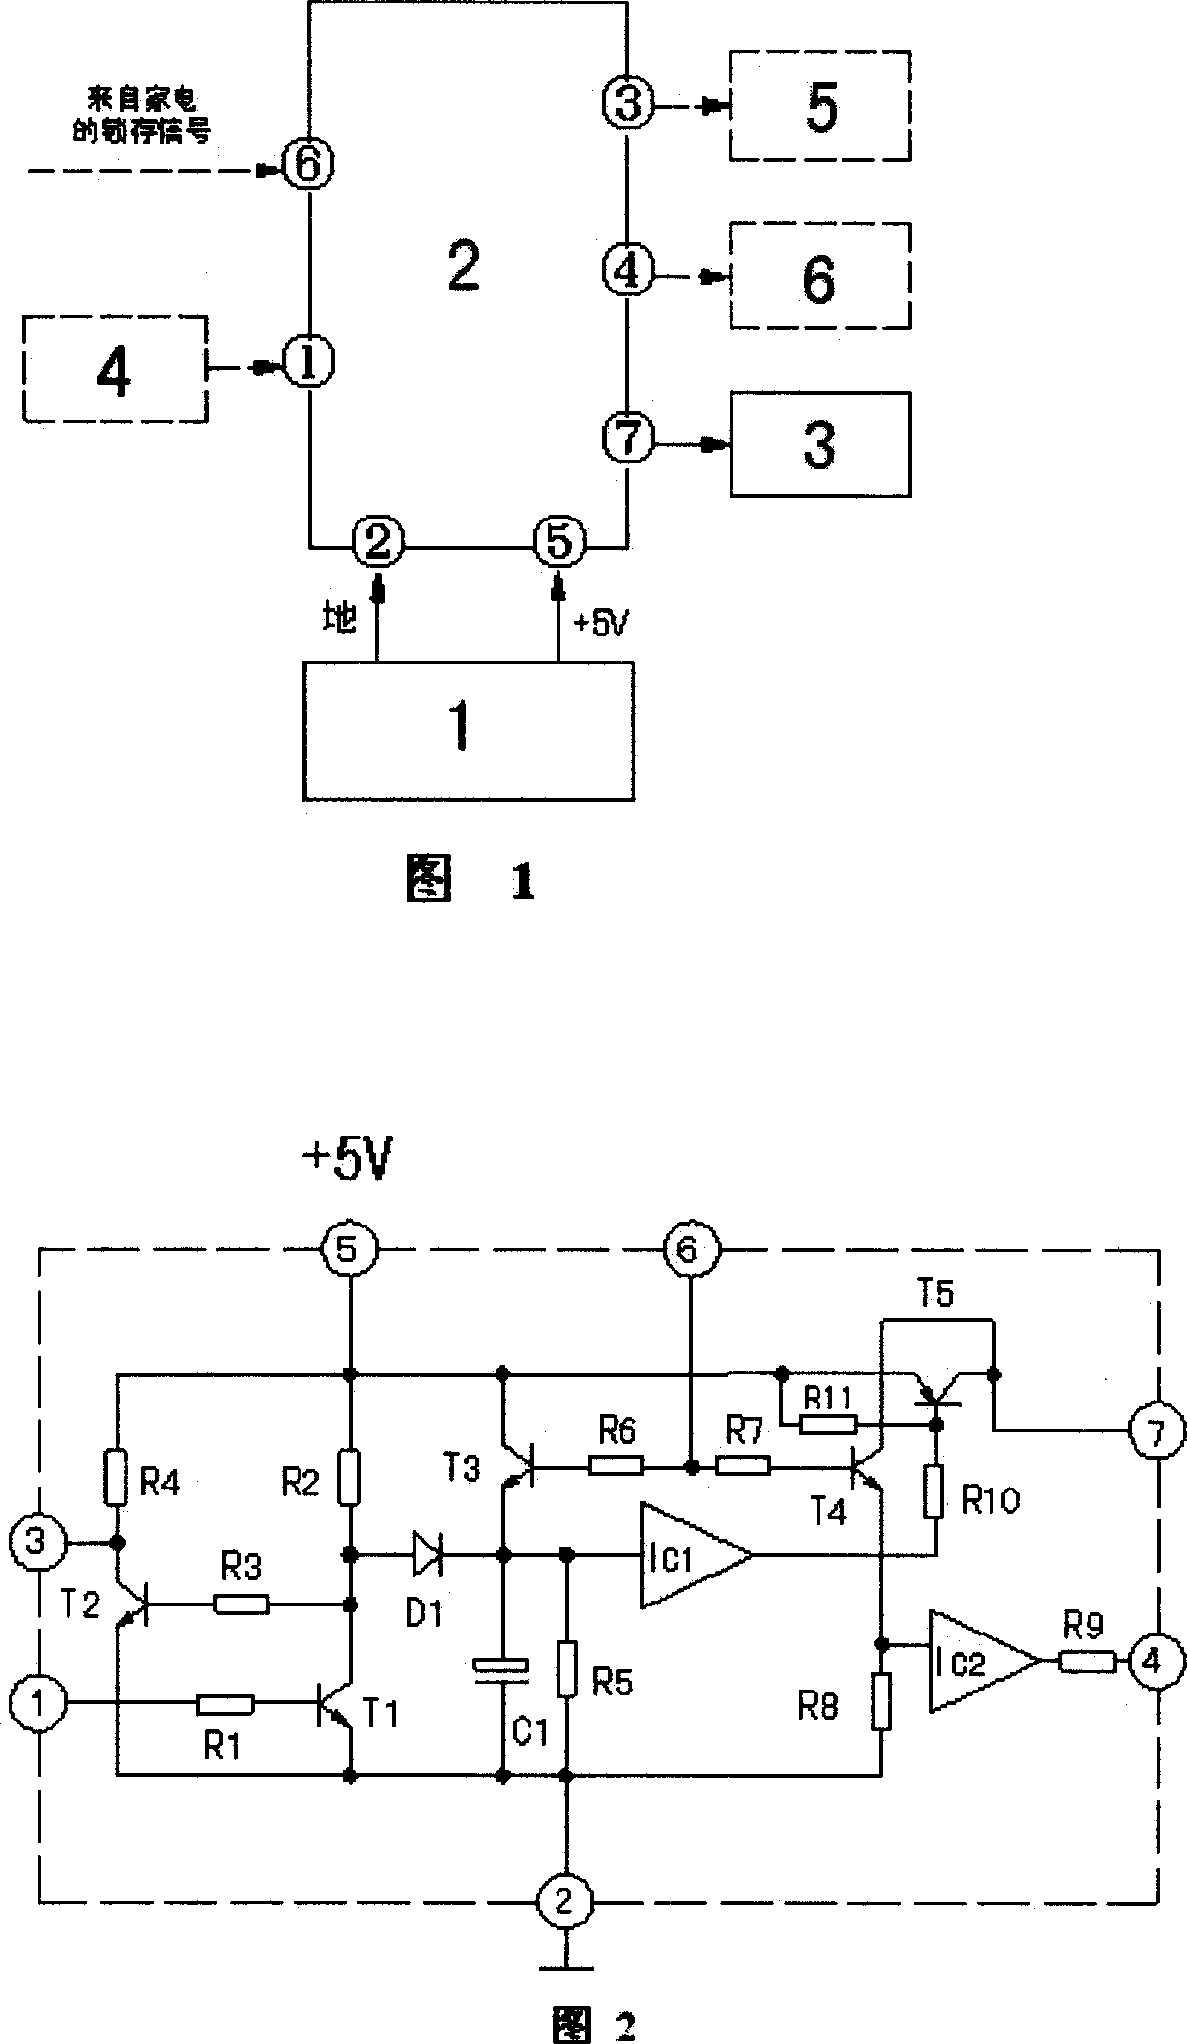 Waiting electric saving method for remote controlled domestic electric equipment and use device